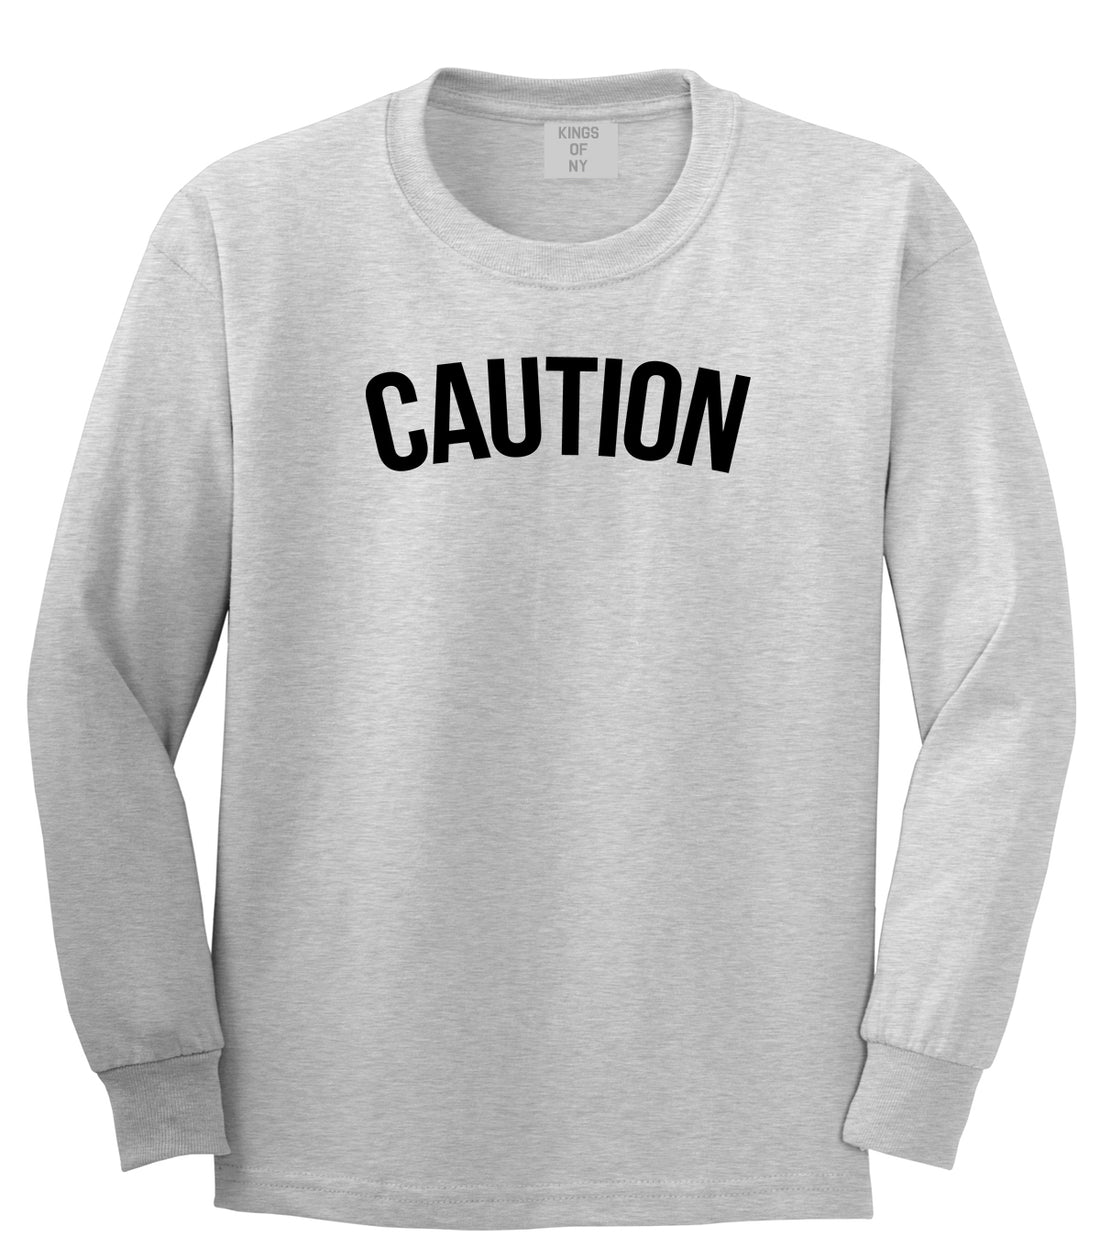 Caution Mens Long Sleeve T-Shirt Grey by Kings Of NY